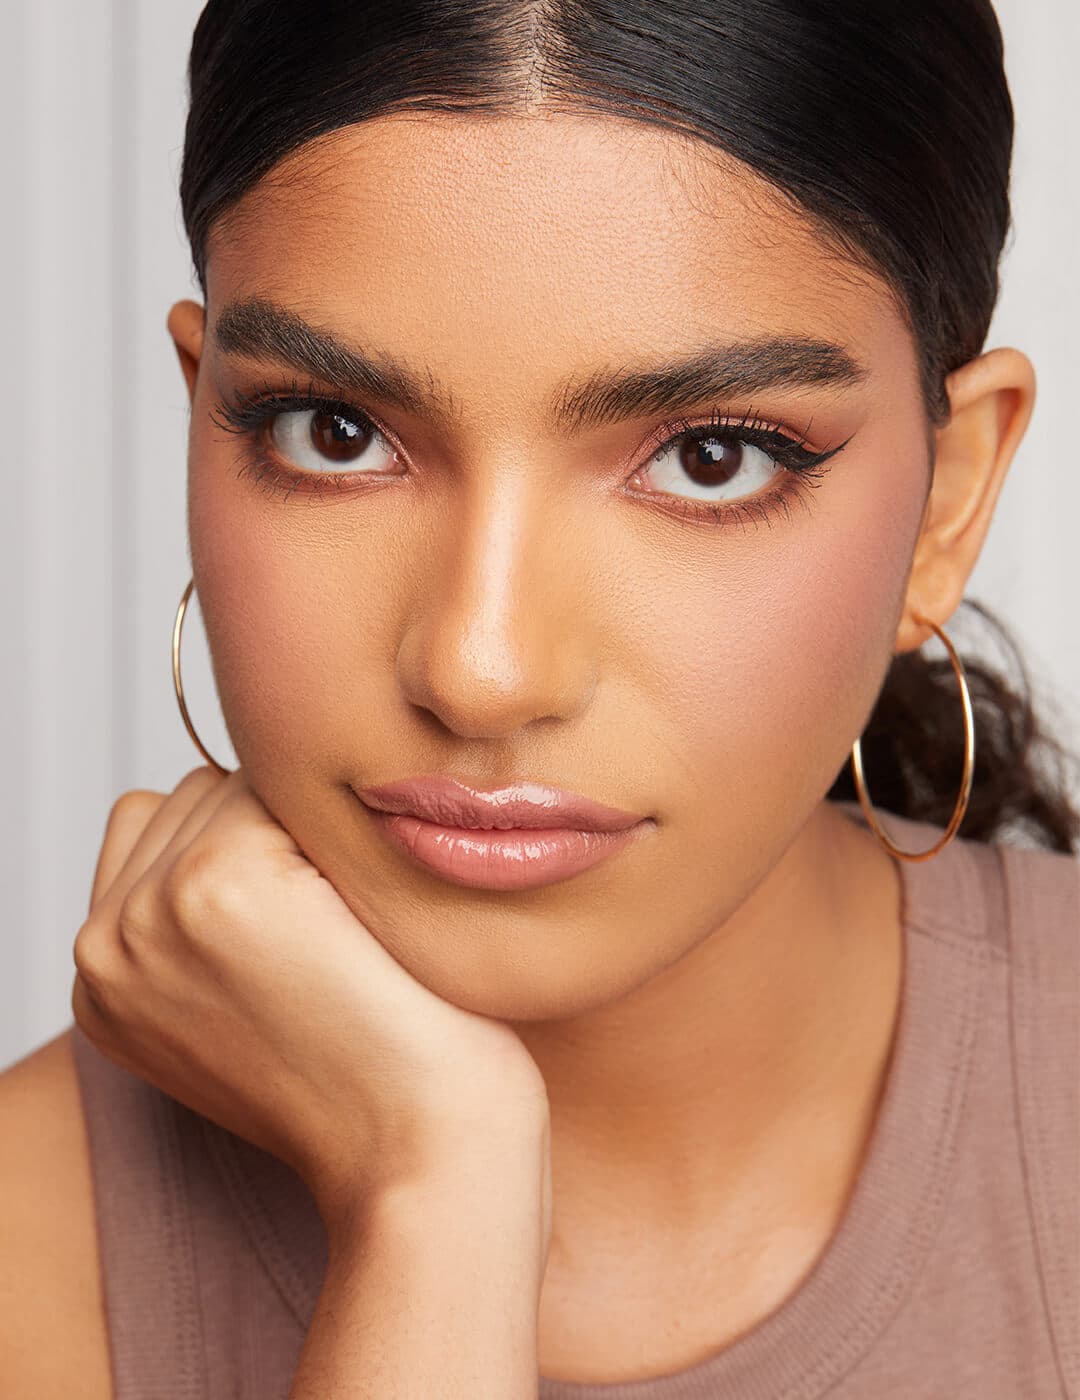 Close-up of a model with rose gold eyeshadow makeup look, nude pink lips, and gold hoop earrings